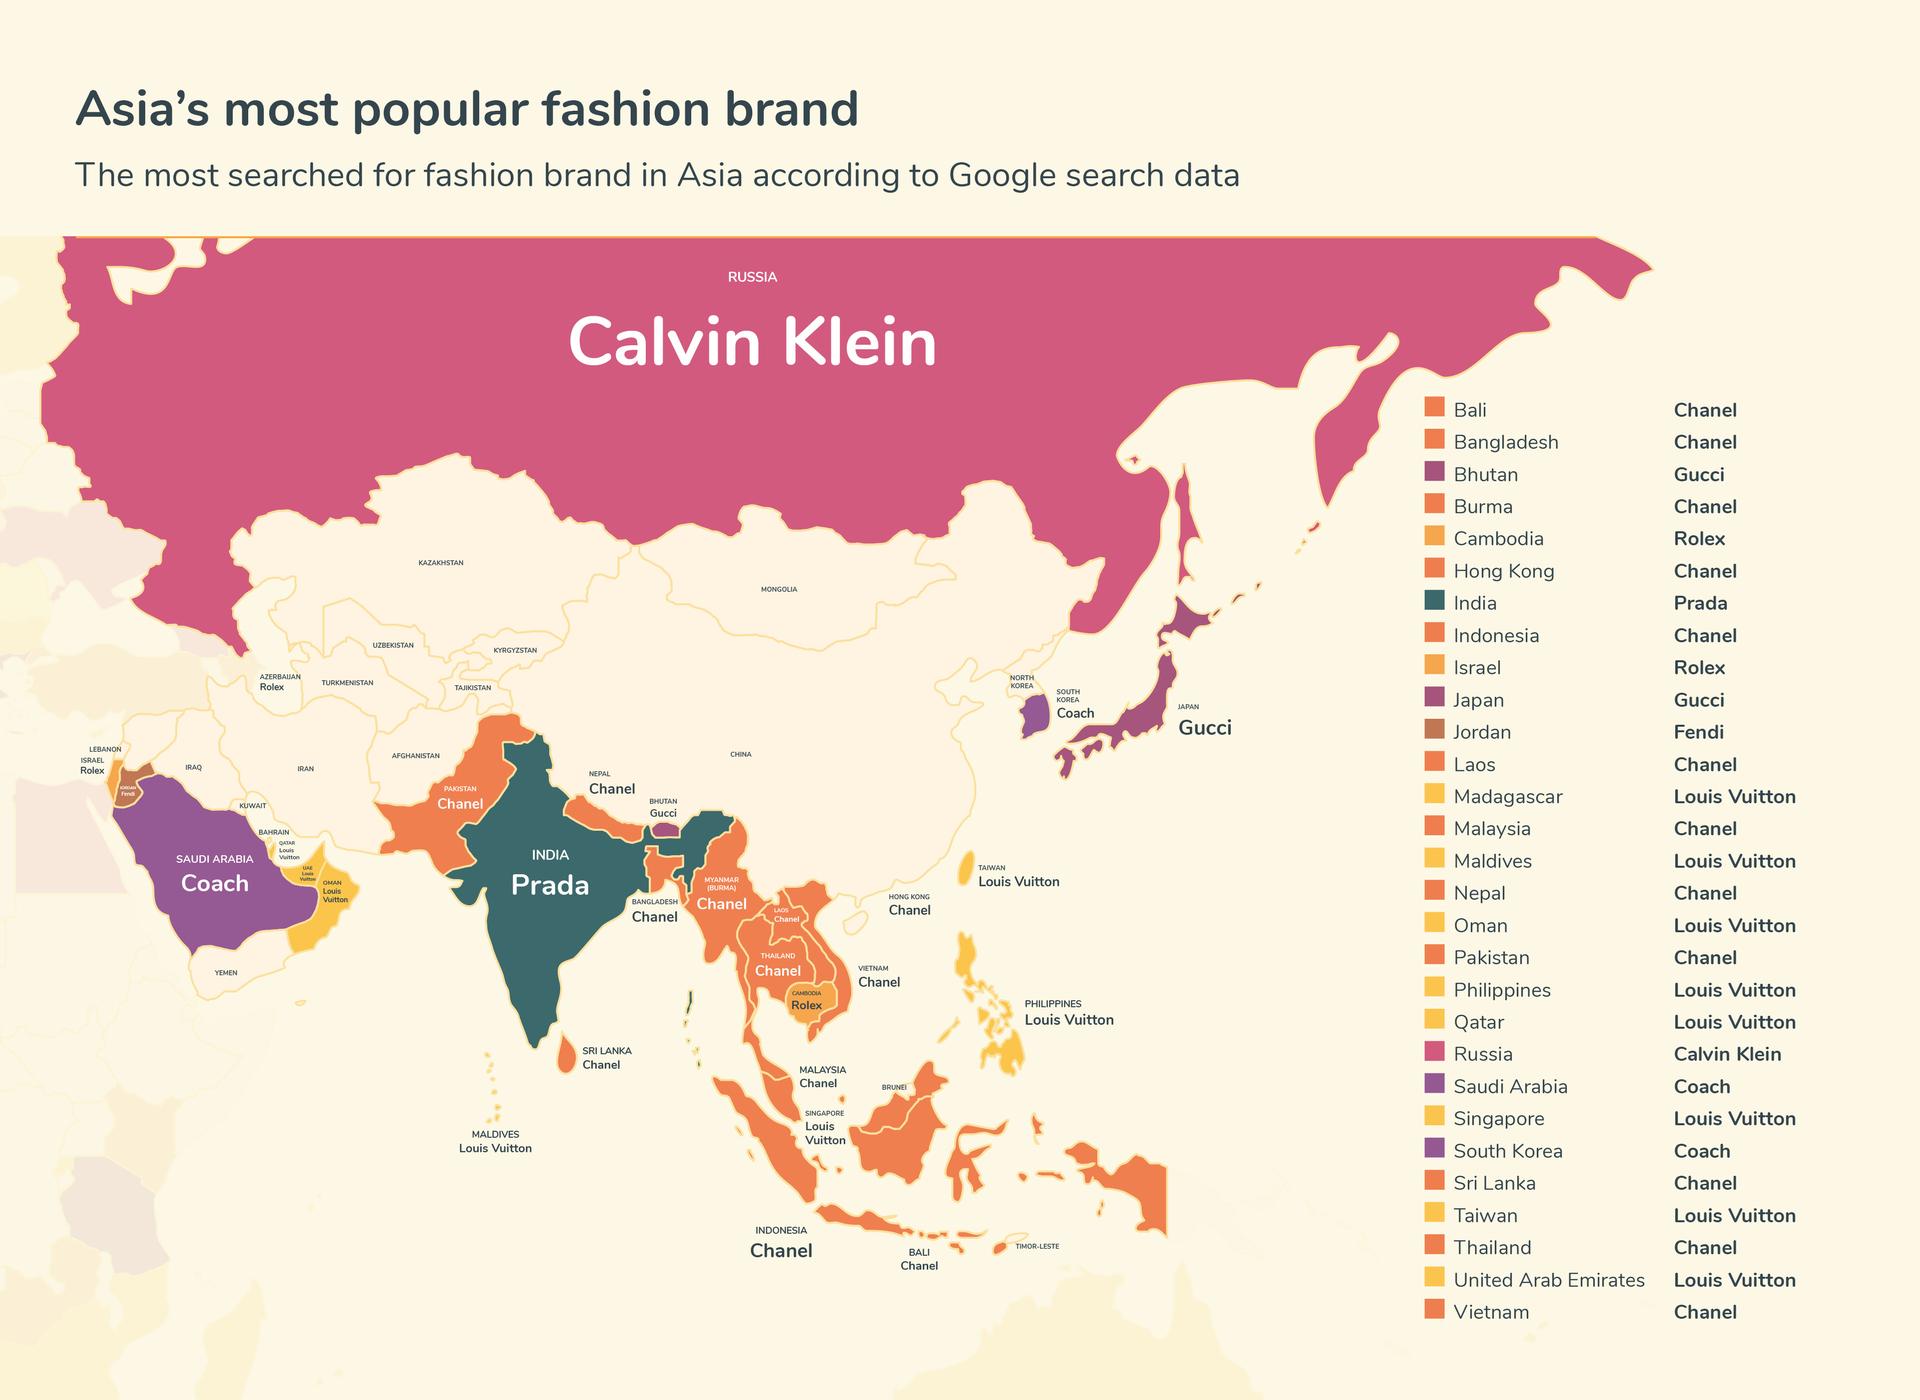 Louis Vuitton is the most searched-for brand in the UAE and the